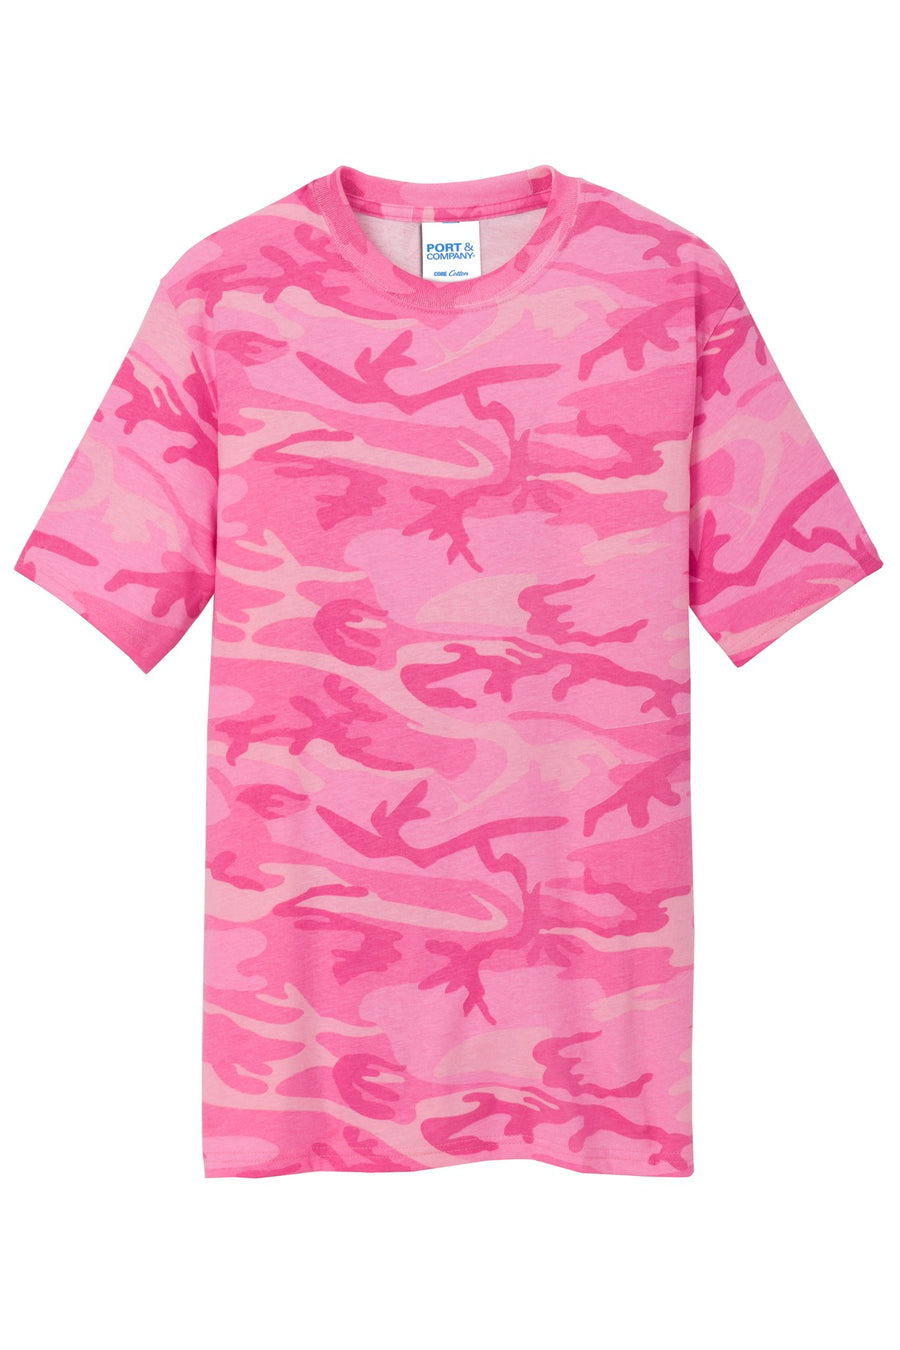 PC54C-Pink Camo-front_flat